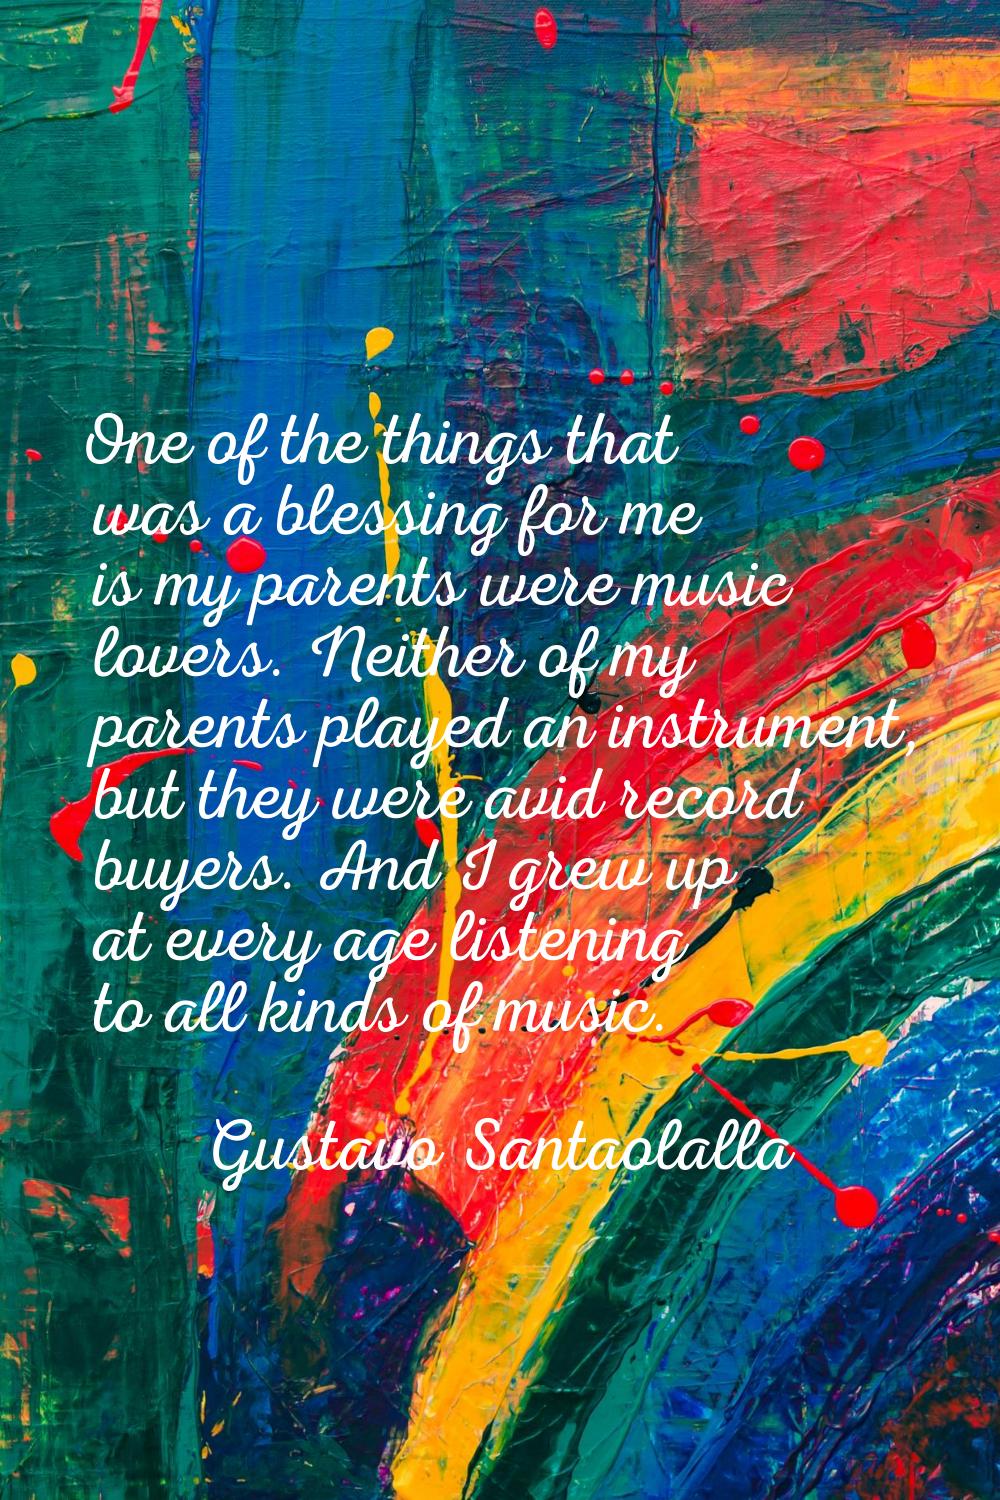 One of the things that was a blessing for me is my parents were music lovers. Neither of my parents